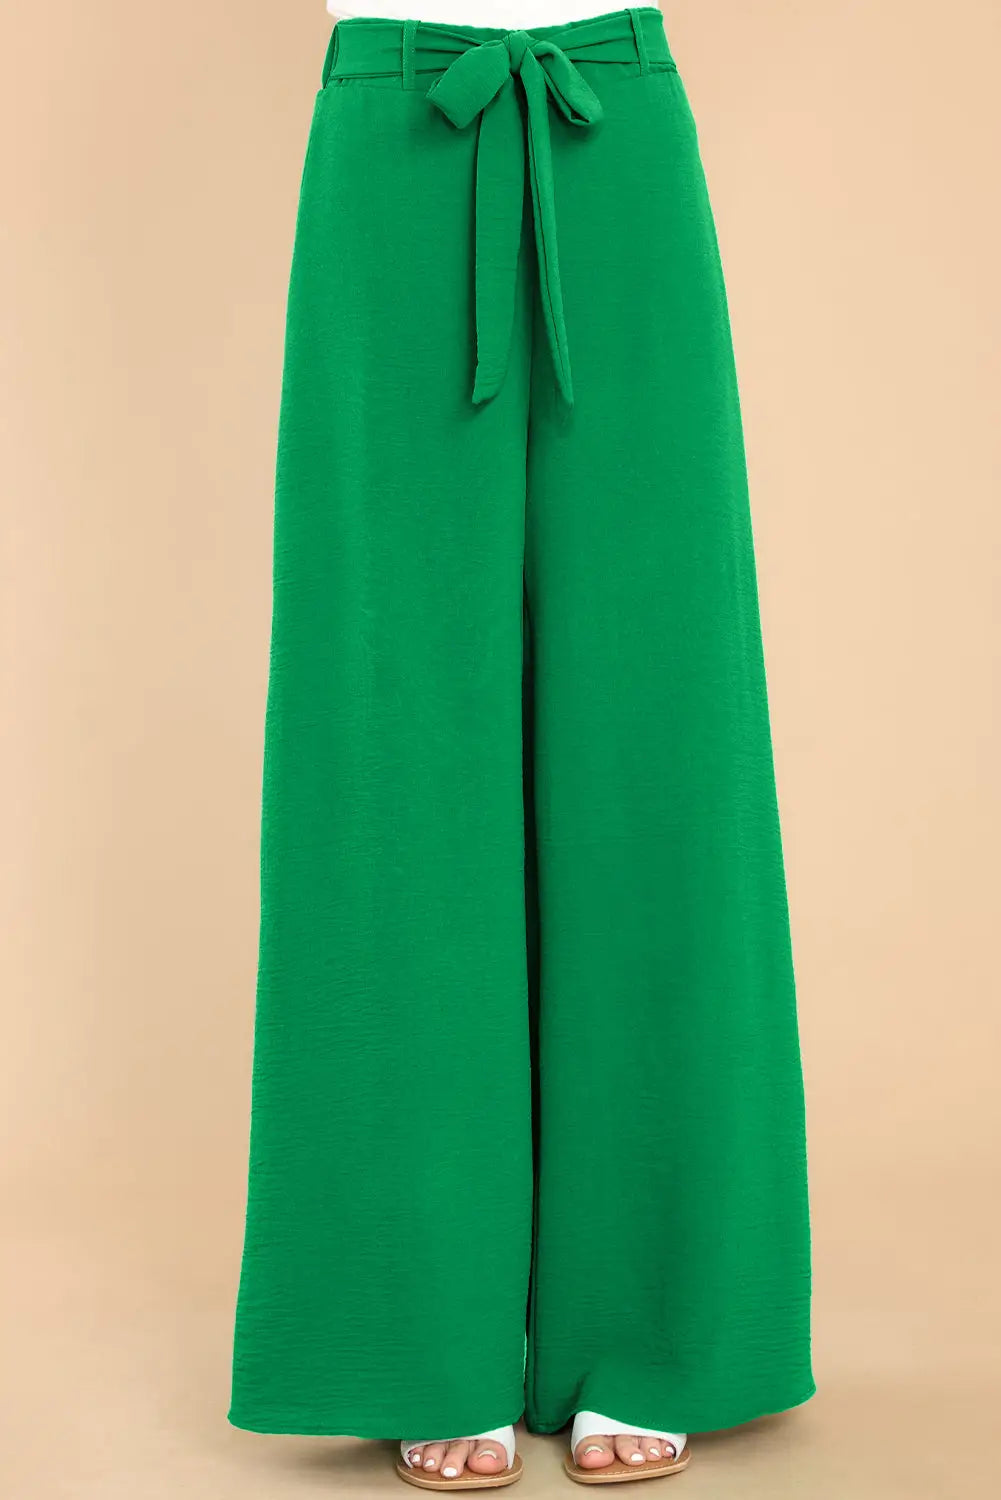 Bright green high waist loops belted wide leg pants